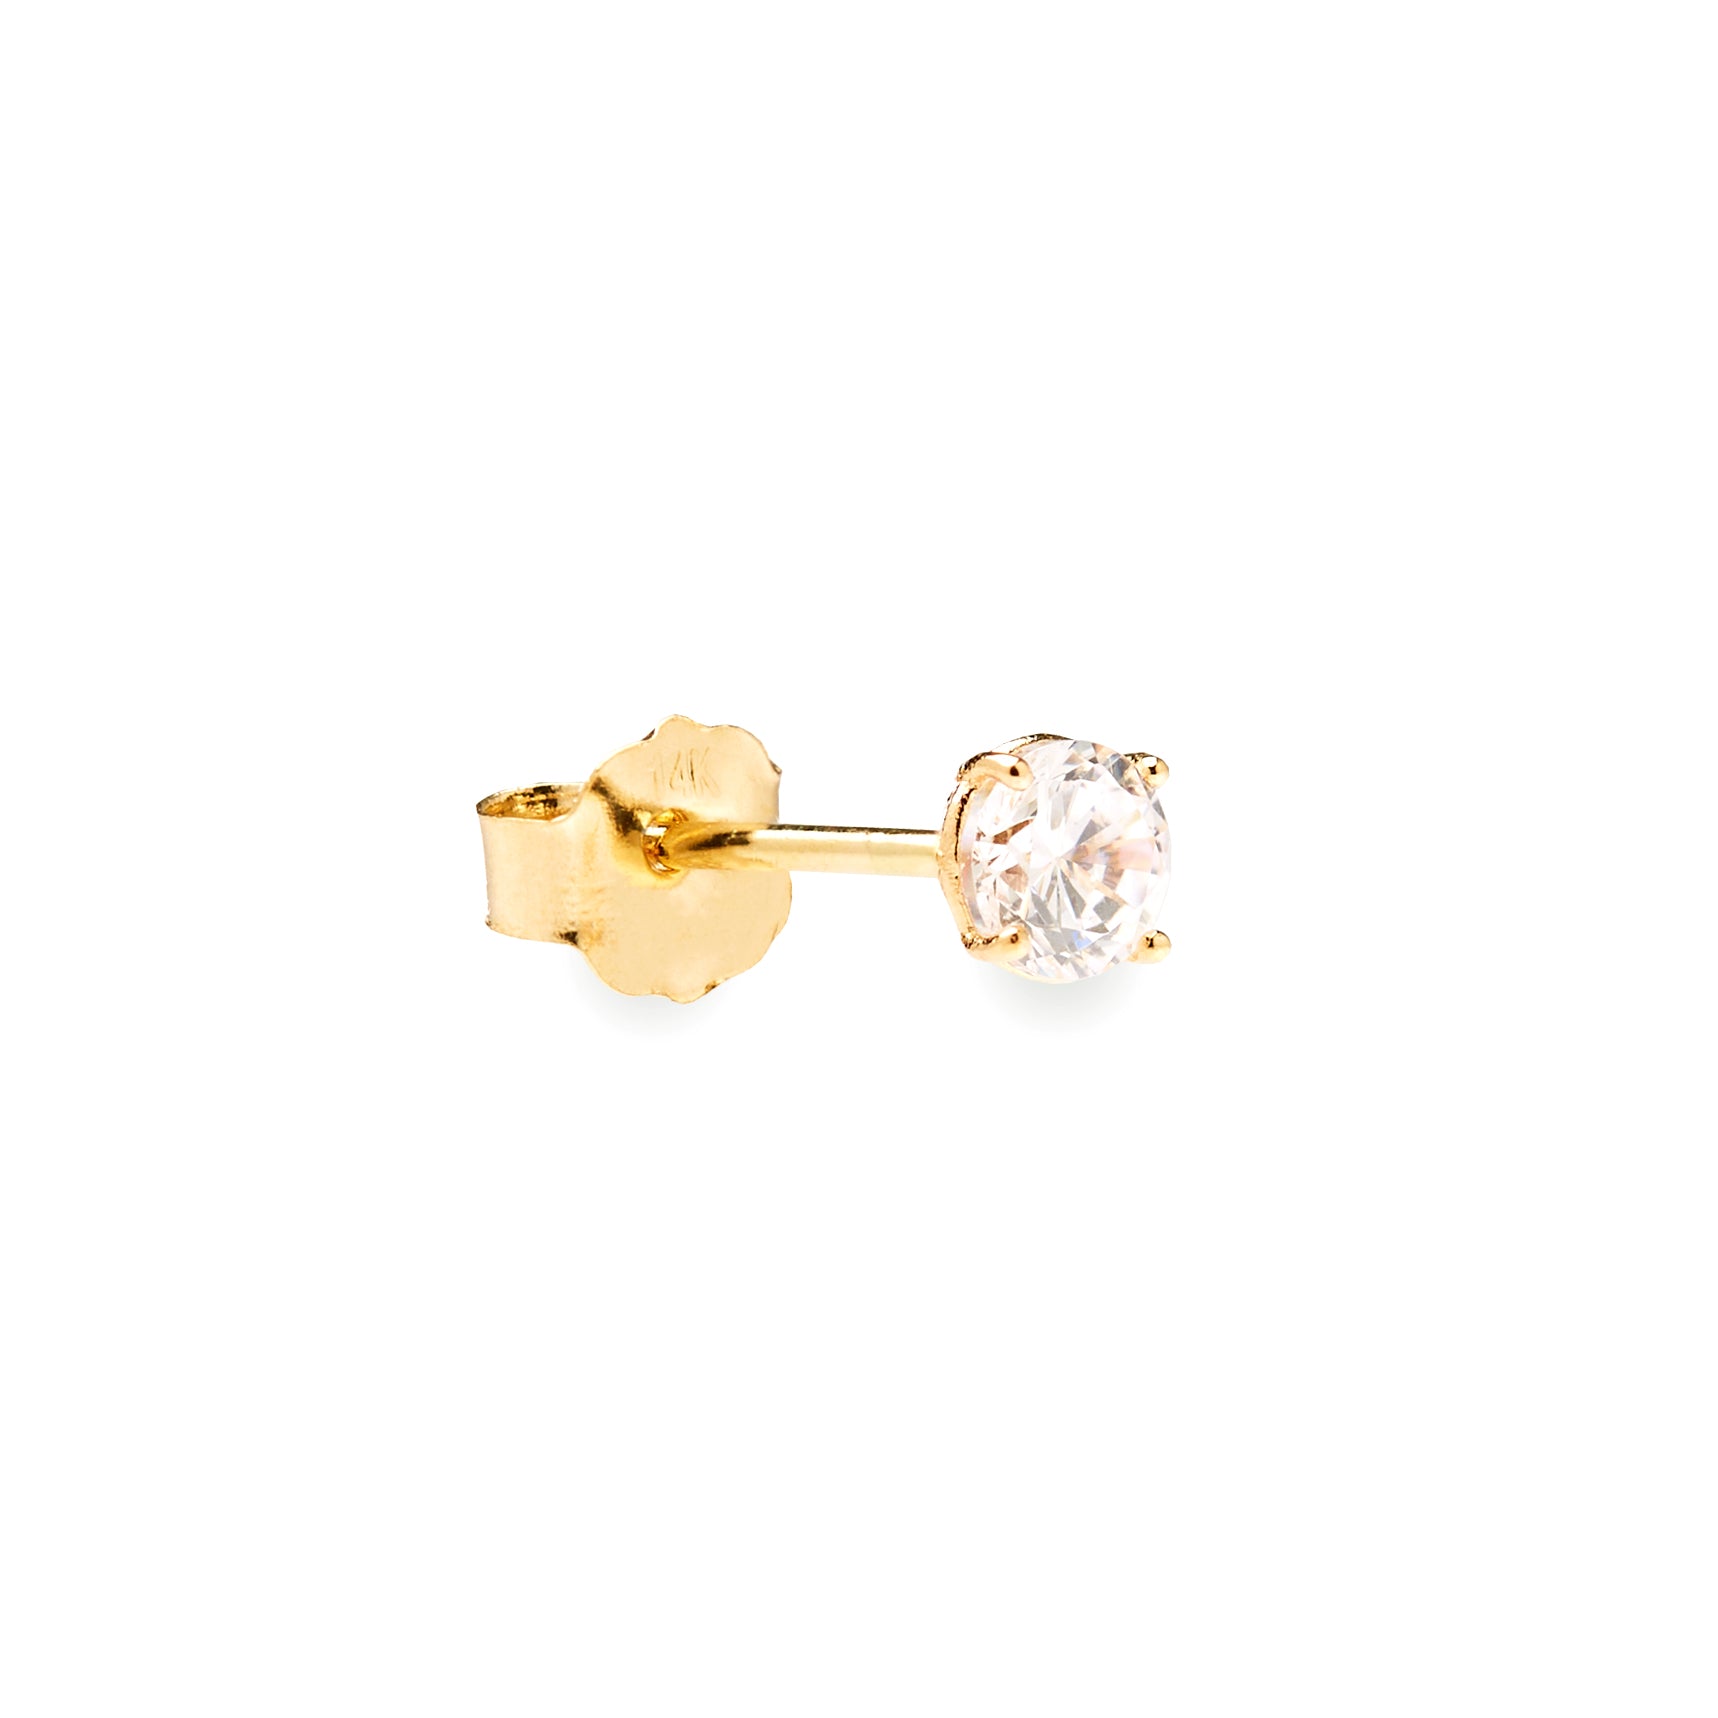 Brilliante medium 14k solid yellow gold single stud earring with solitaire stone - Helix & Conch